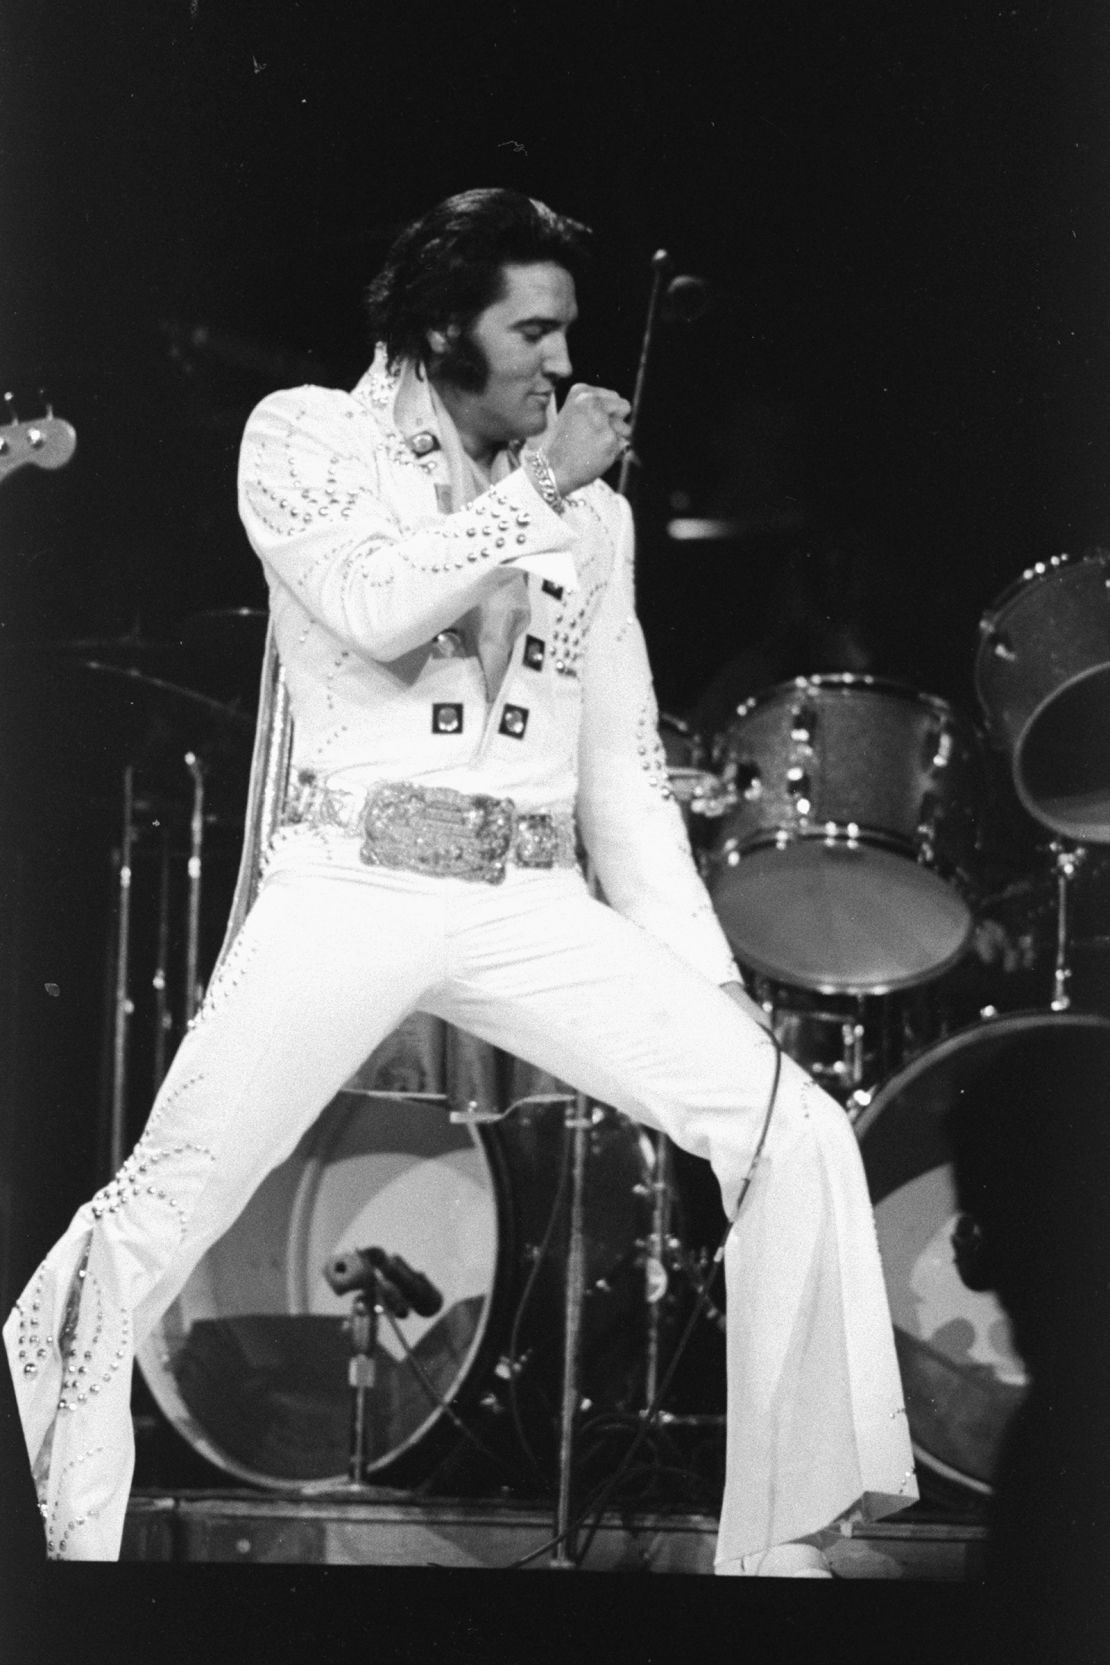 Elvis Presley on stage during his 1972 Madison Square Garden Concert in New York City. 